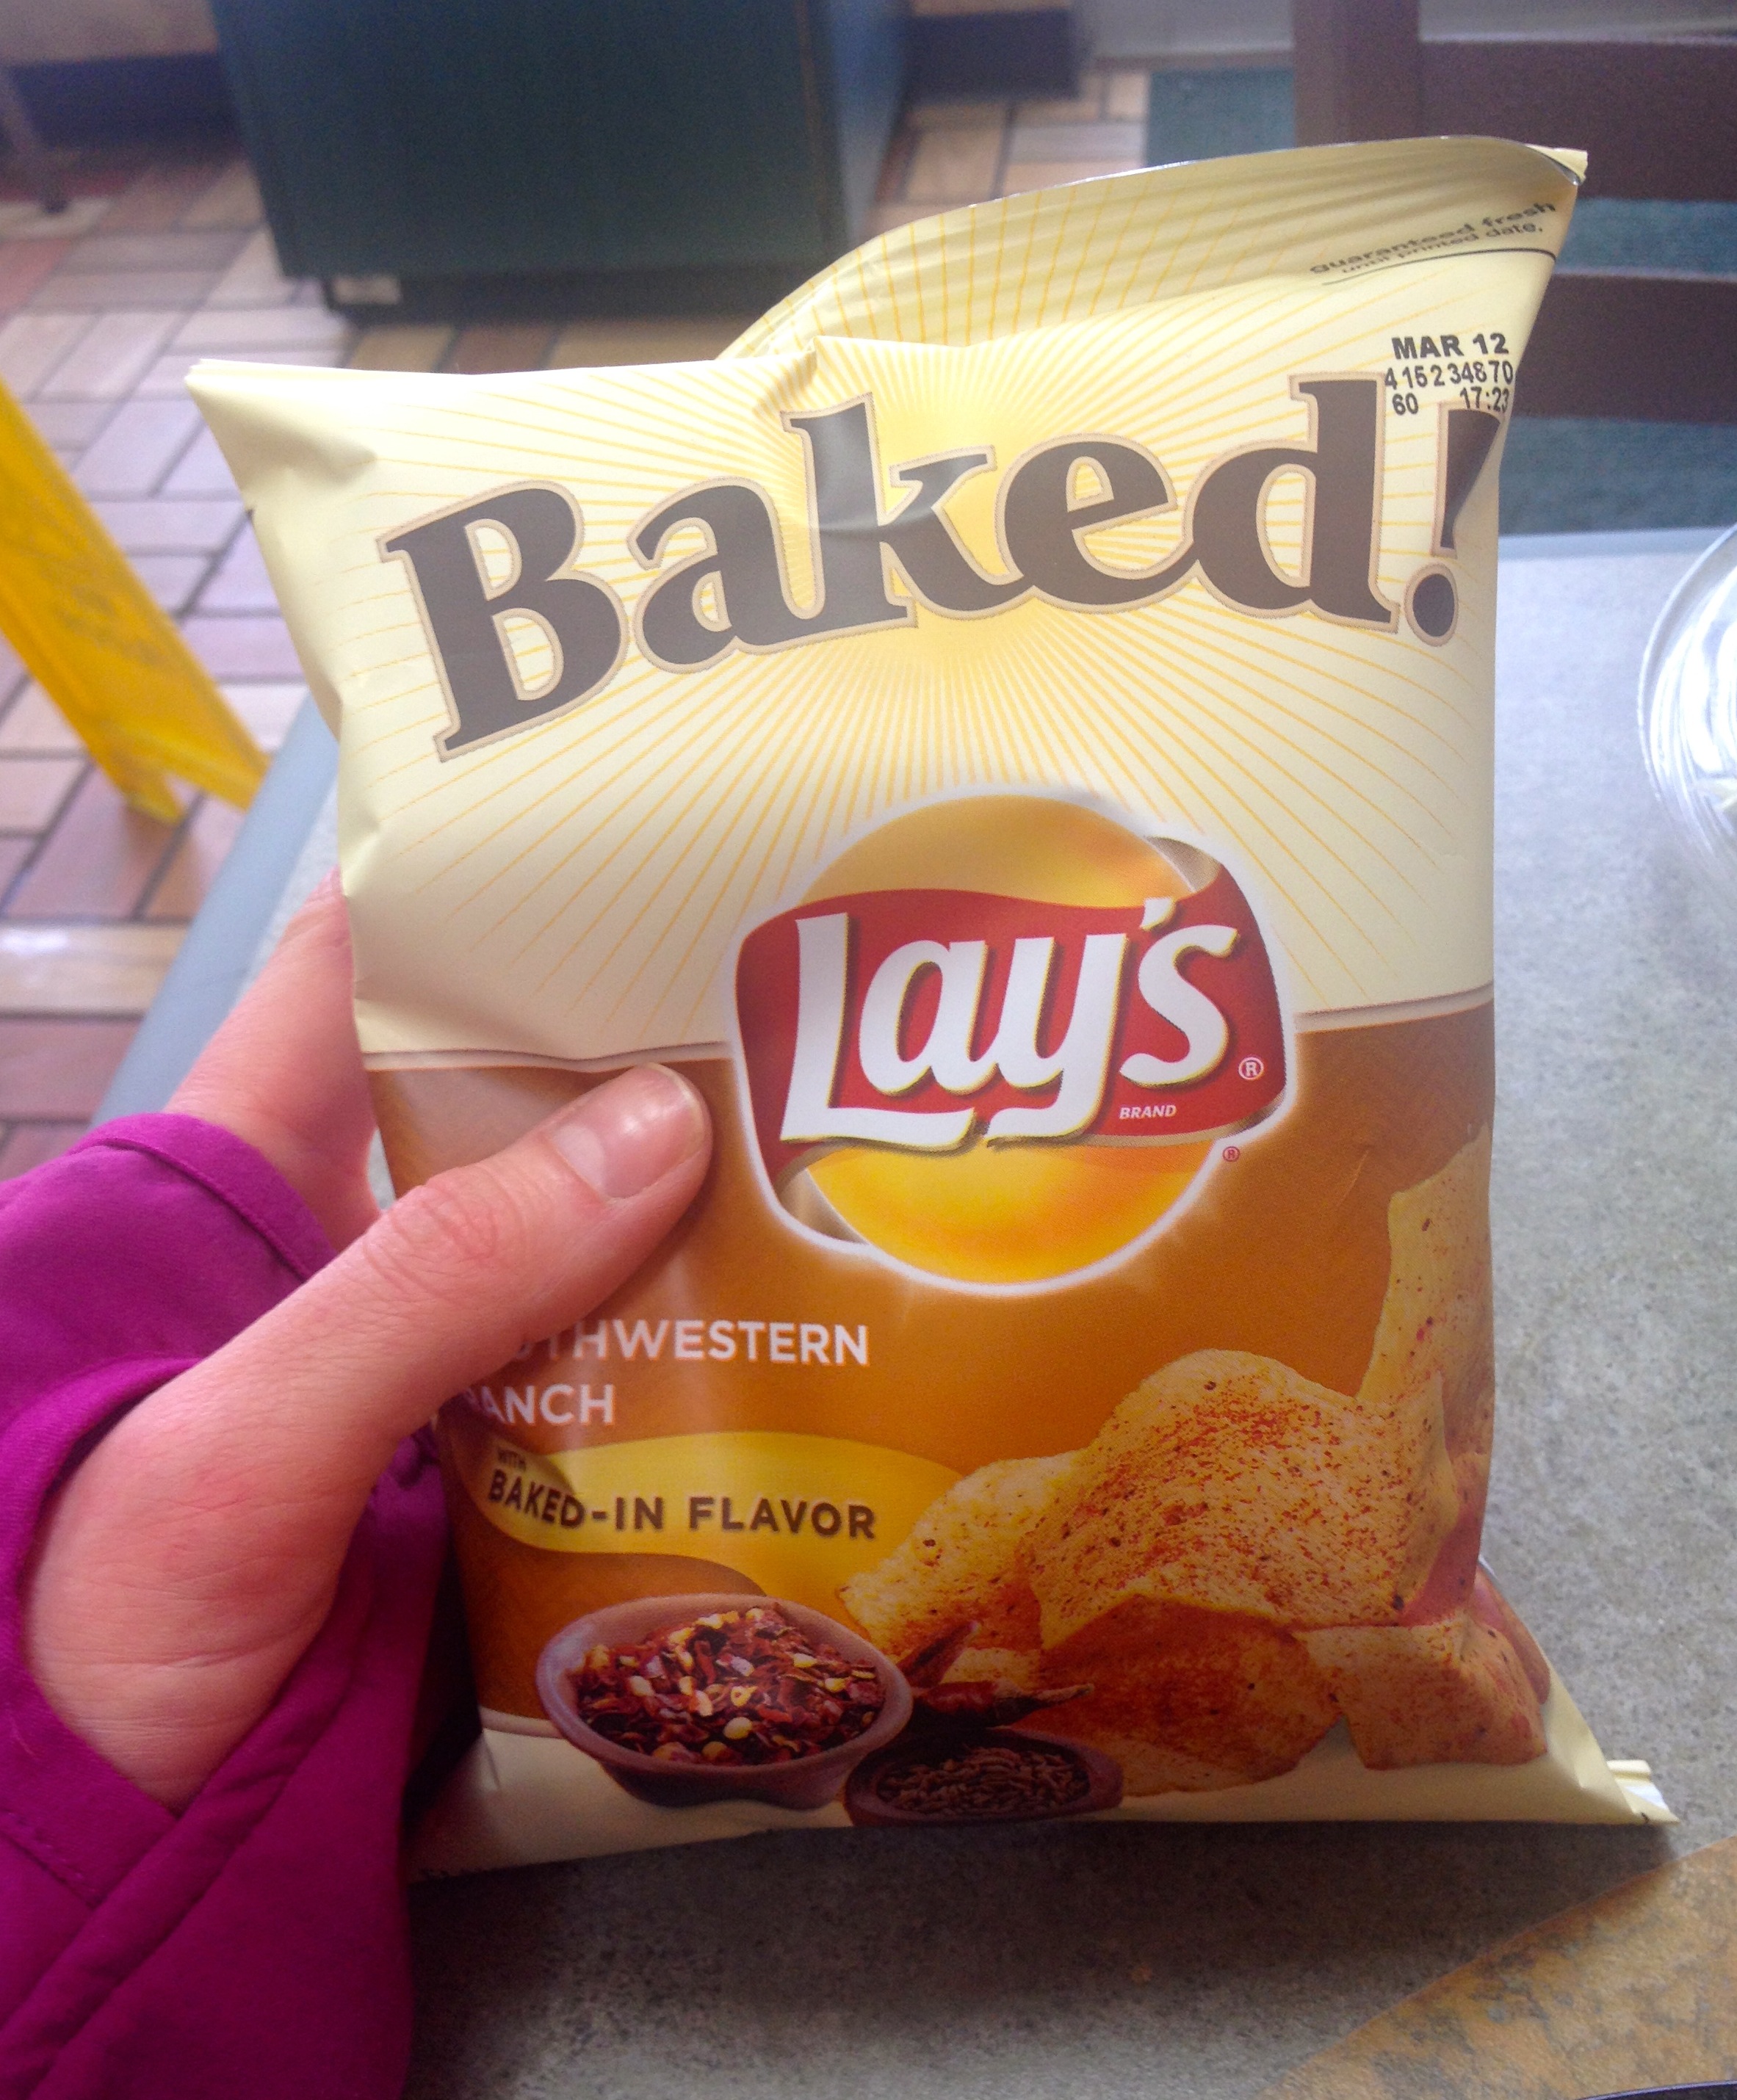 Baked Lays chips